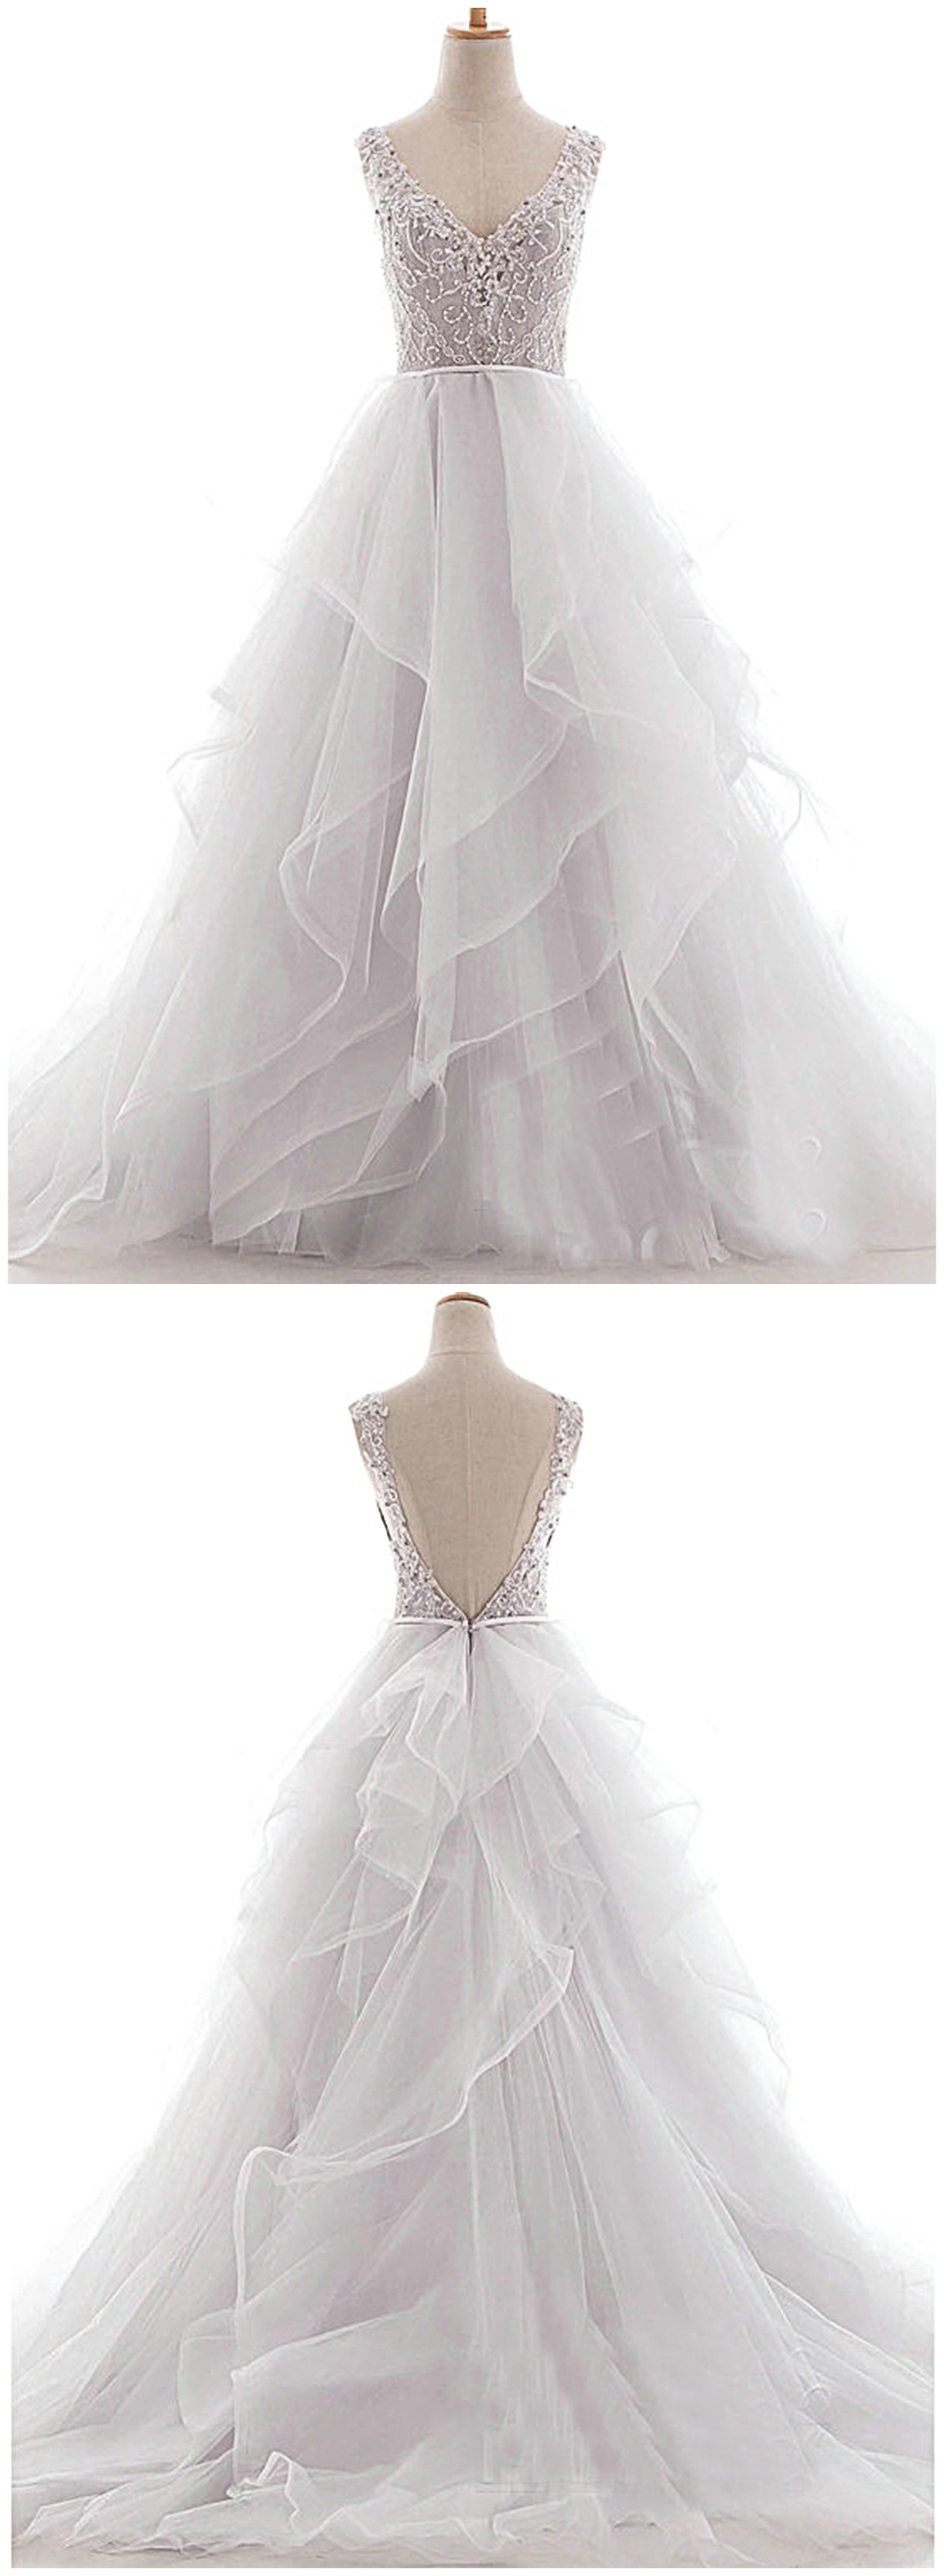 White Tulle Open Back Beaded Long Layered Wedding Dress With Applique